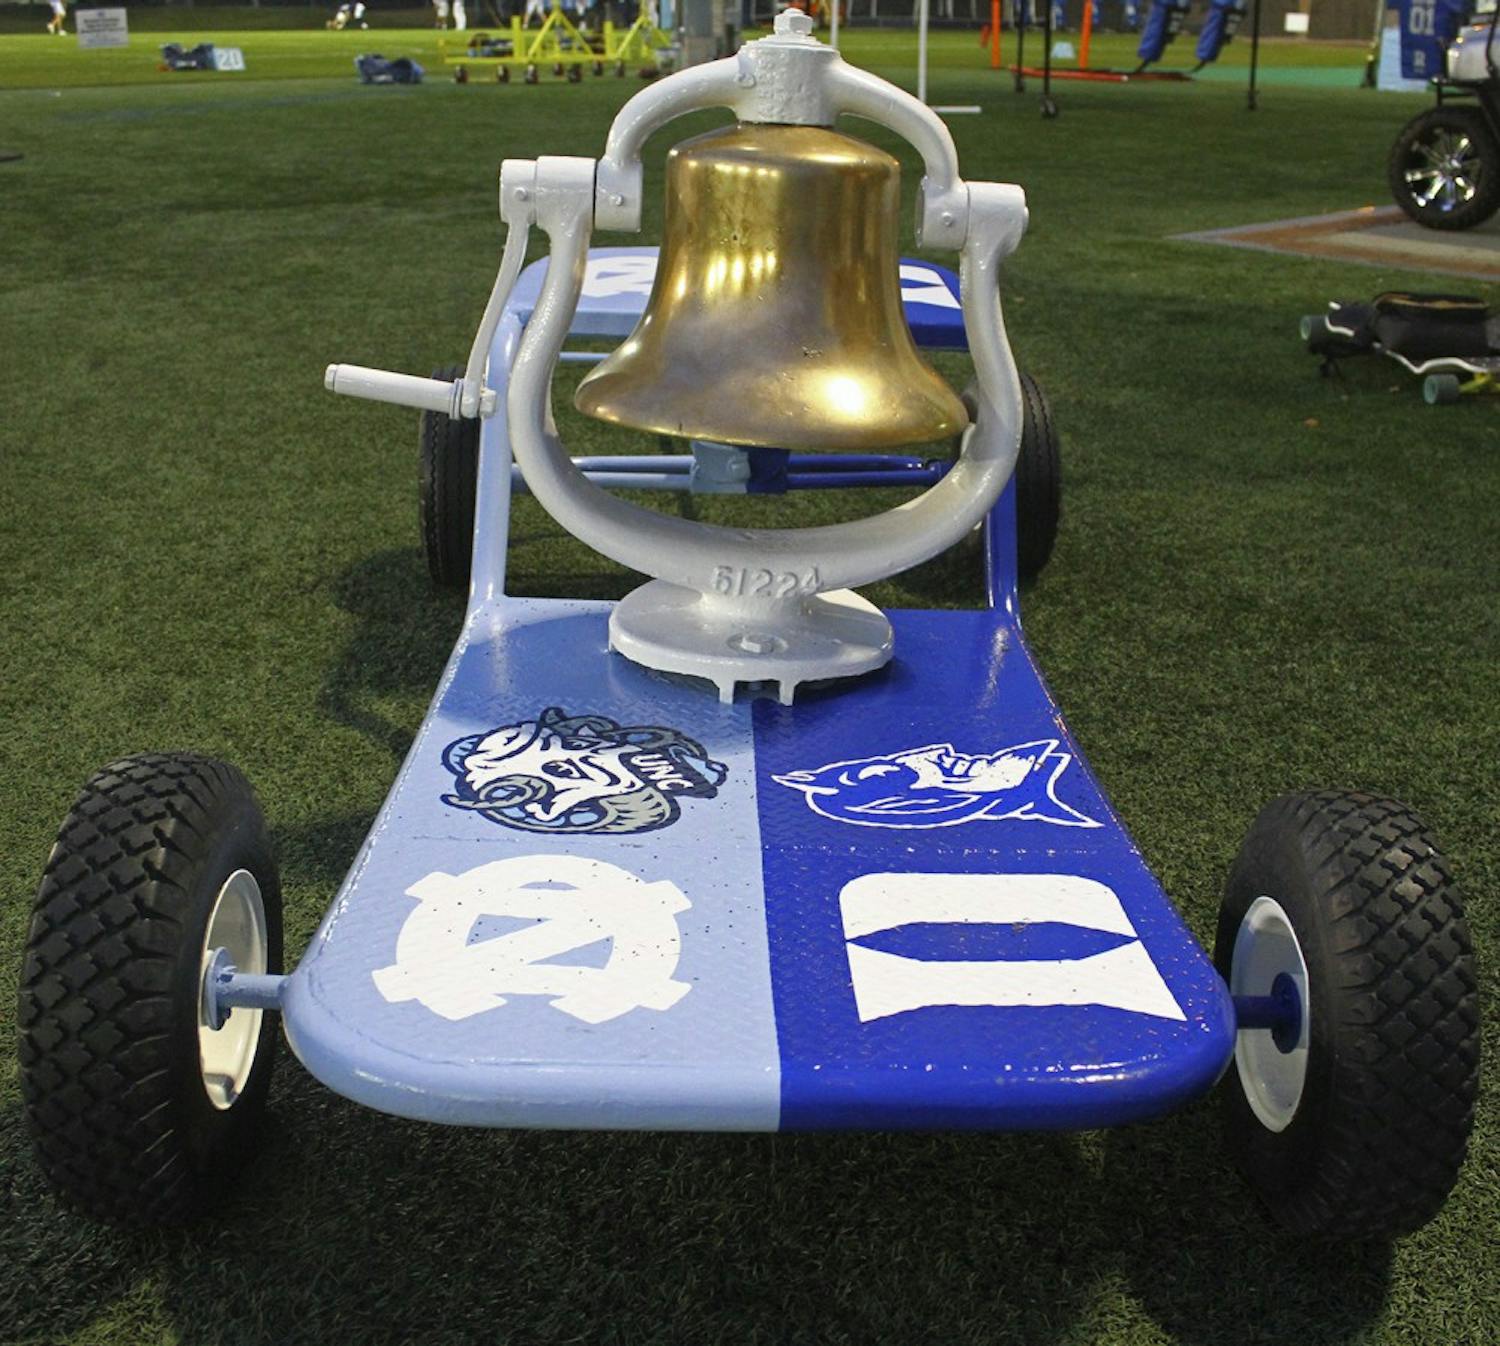 UNC and Duke decided to change the color scheme of the victory bell platform, and say no to post game spray-painting.